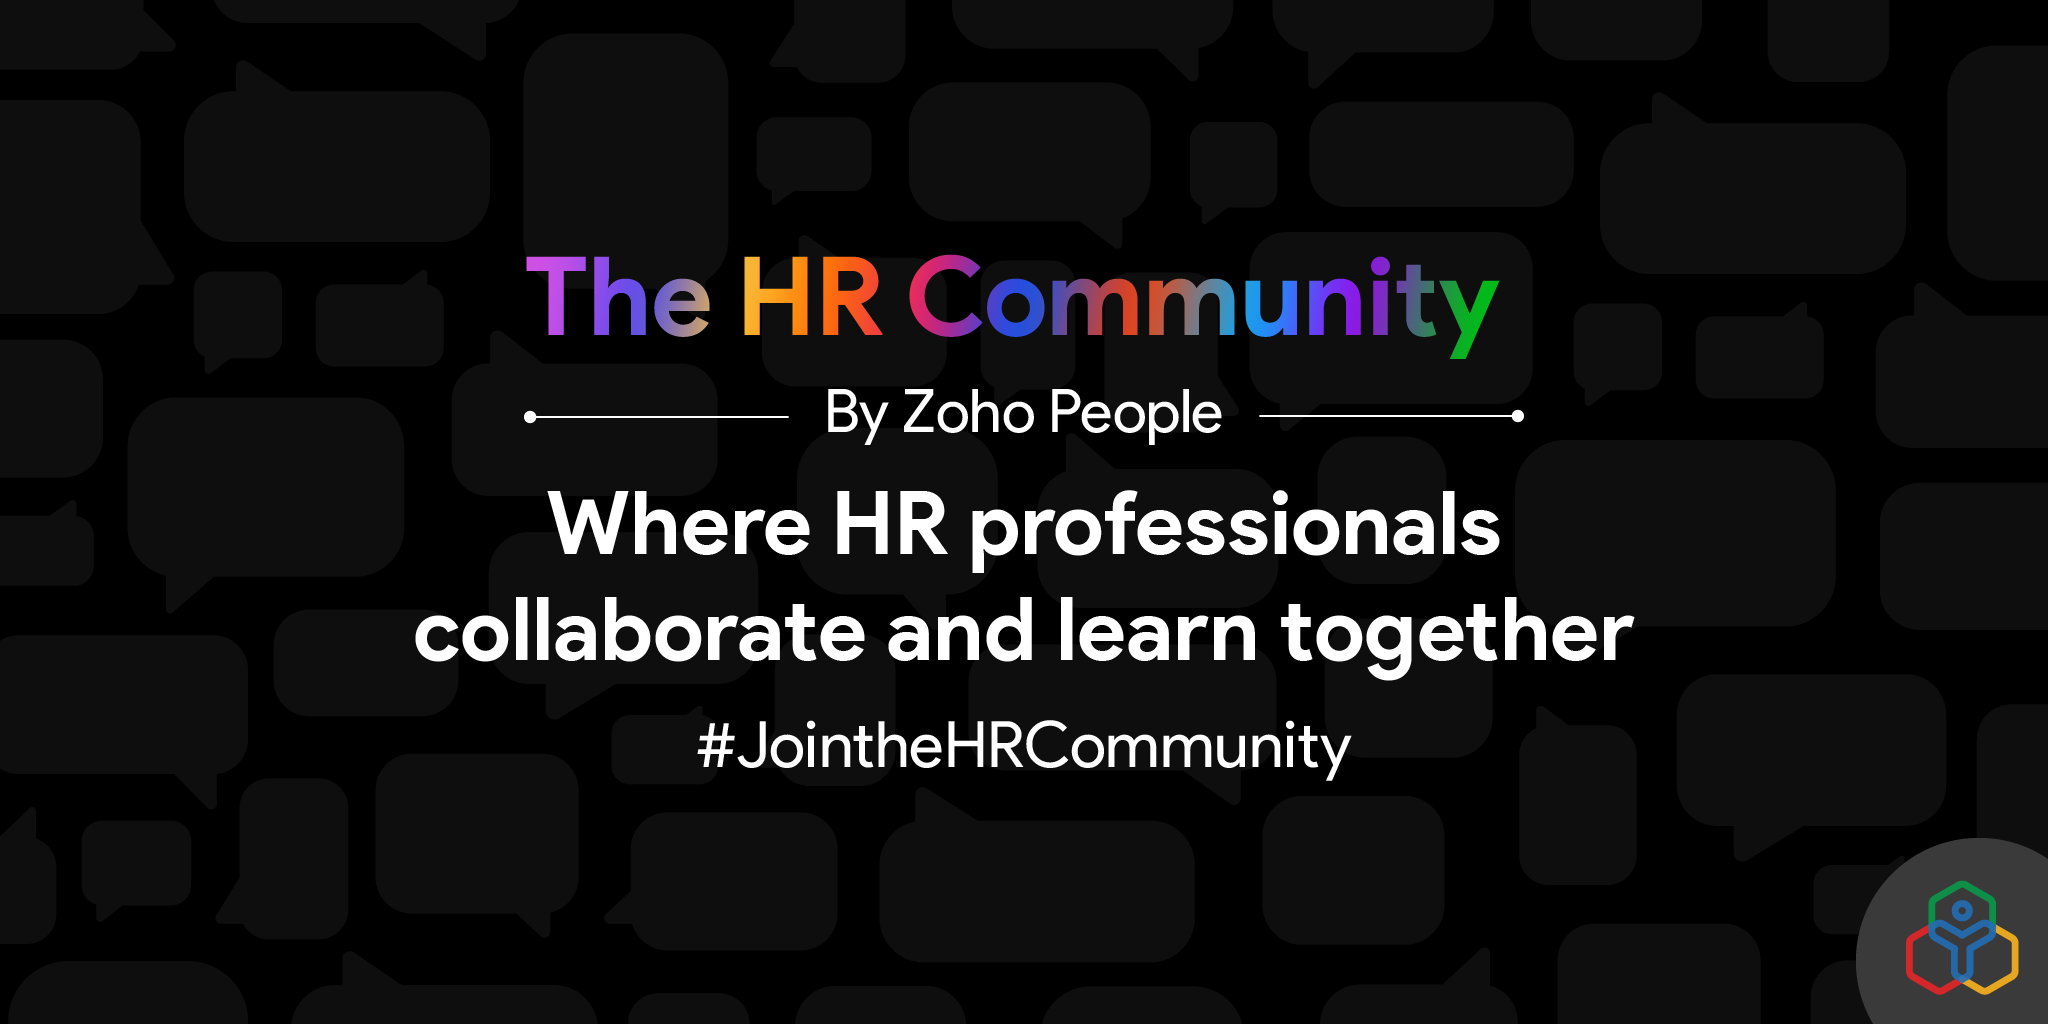 HR Community by Zoho People